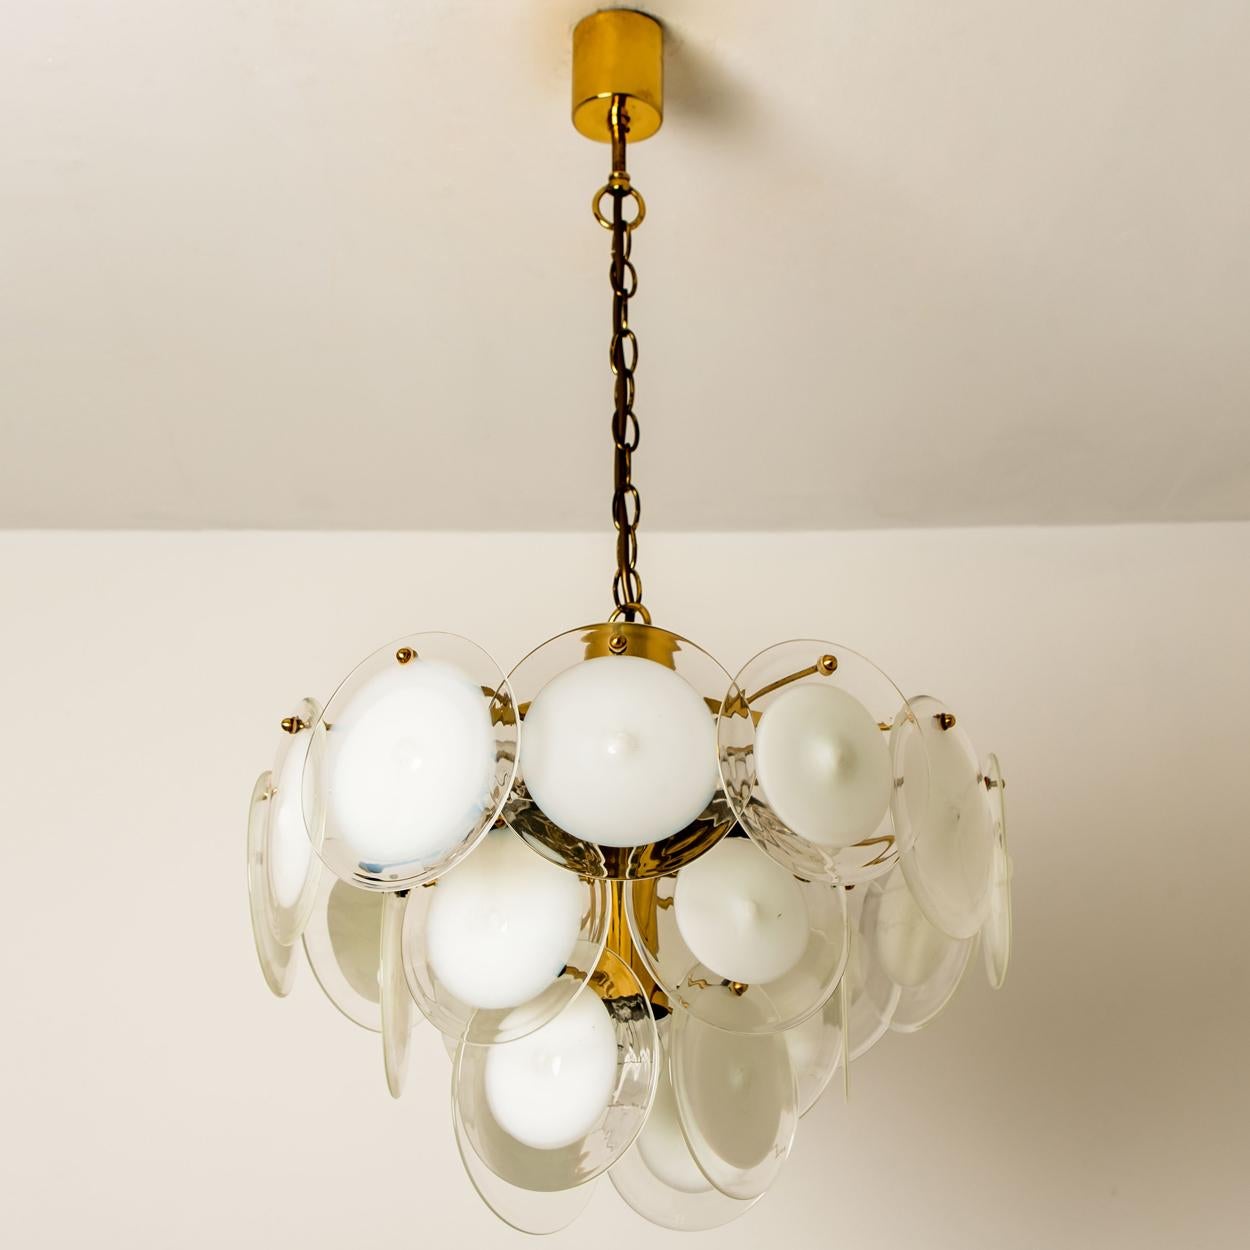 Mid-Century Modern White Glass Disc Chandelier in the Style of Vistosi, Italy, 1970s For Sale